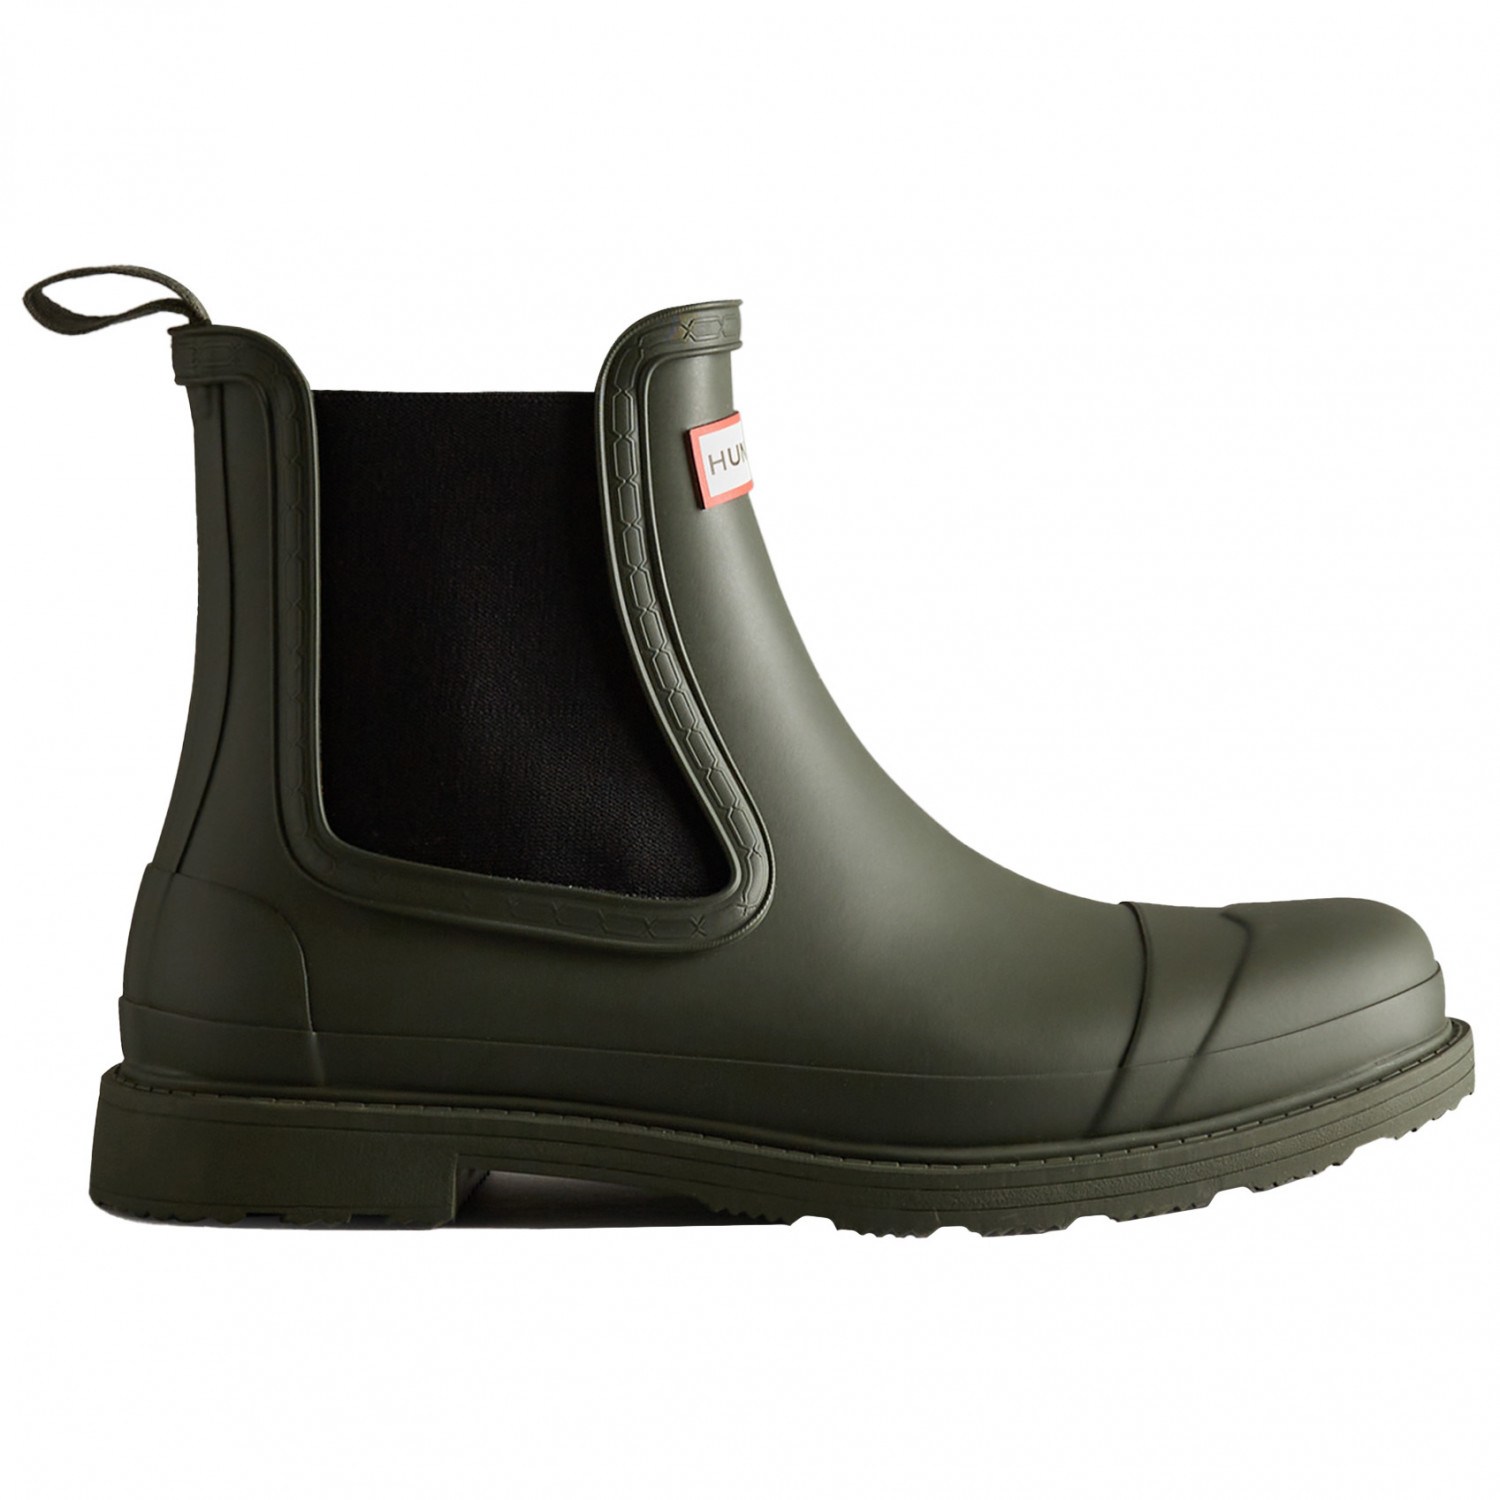 Резиновые сапоги Hunter Boots Commando Chelsea Boot, цвет Dark Olive children s boots 4 12y girls front zipper martin boots big kids leather shoes chelsea mid calf boots toddler s simple ankel boot